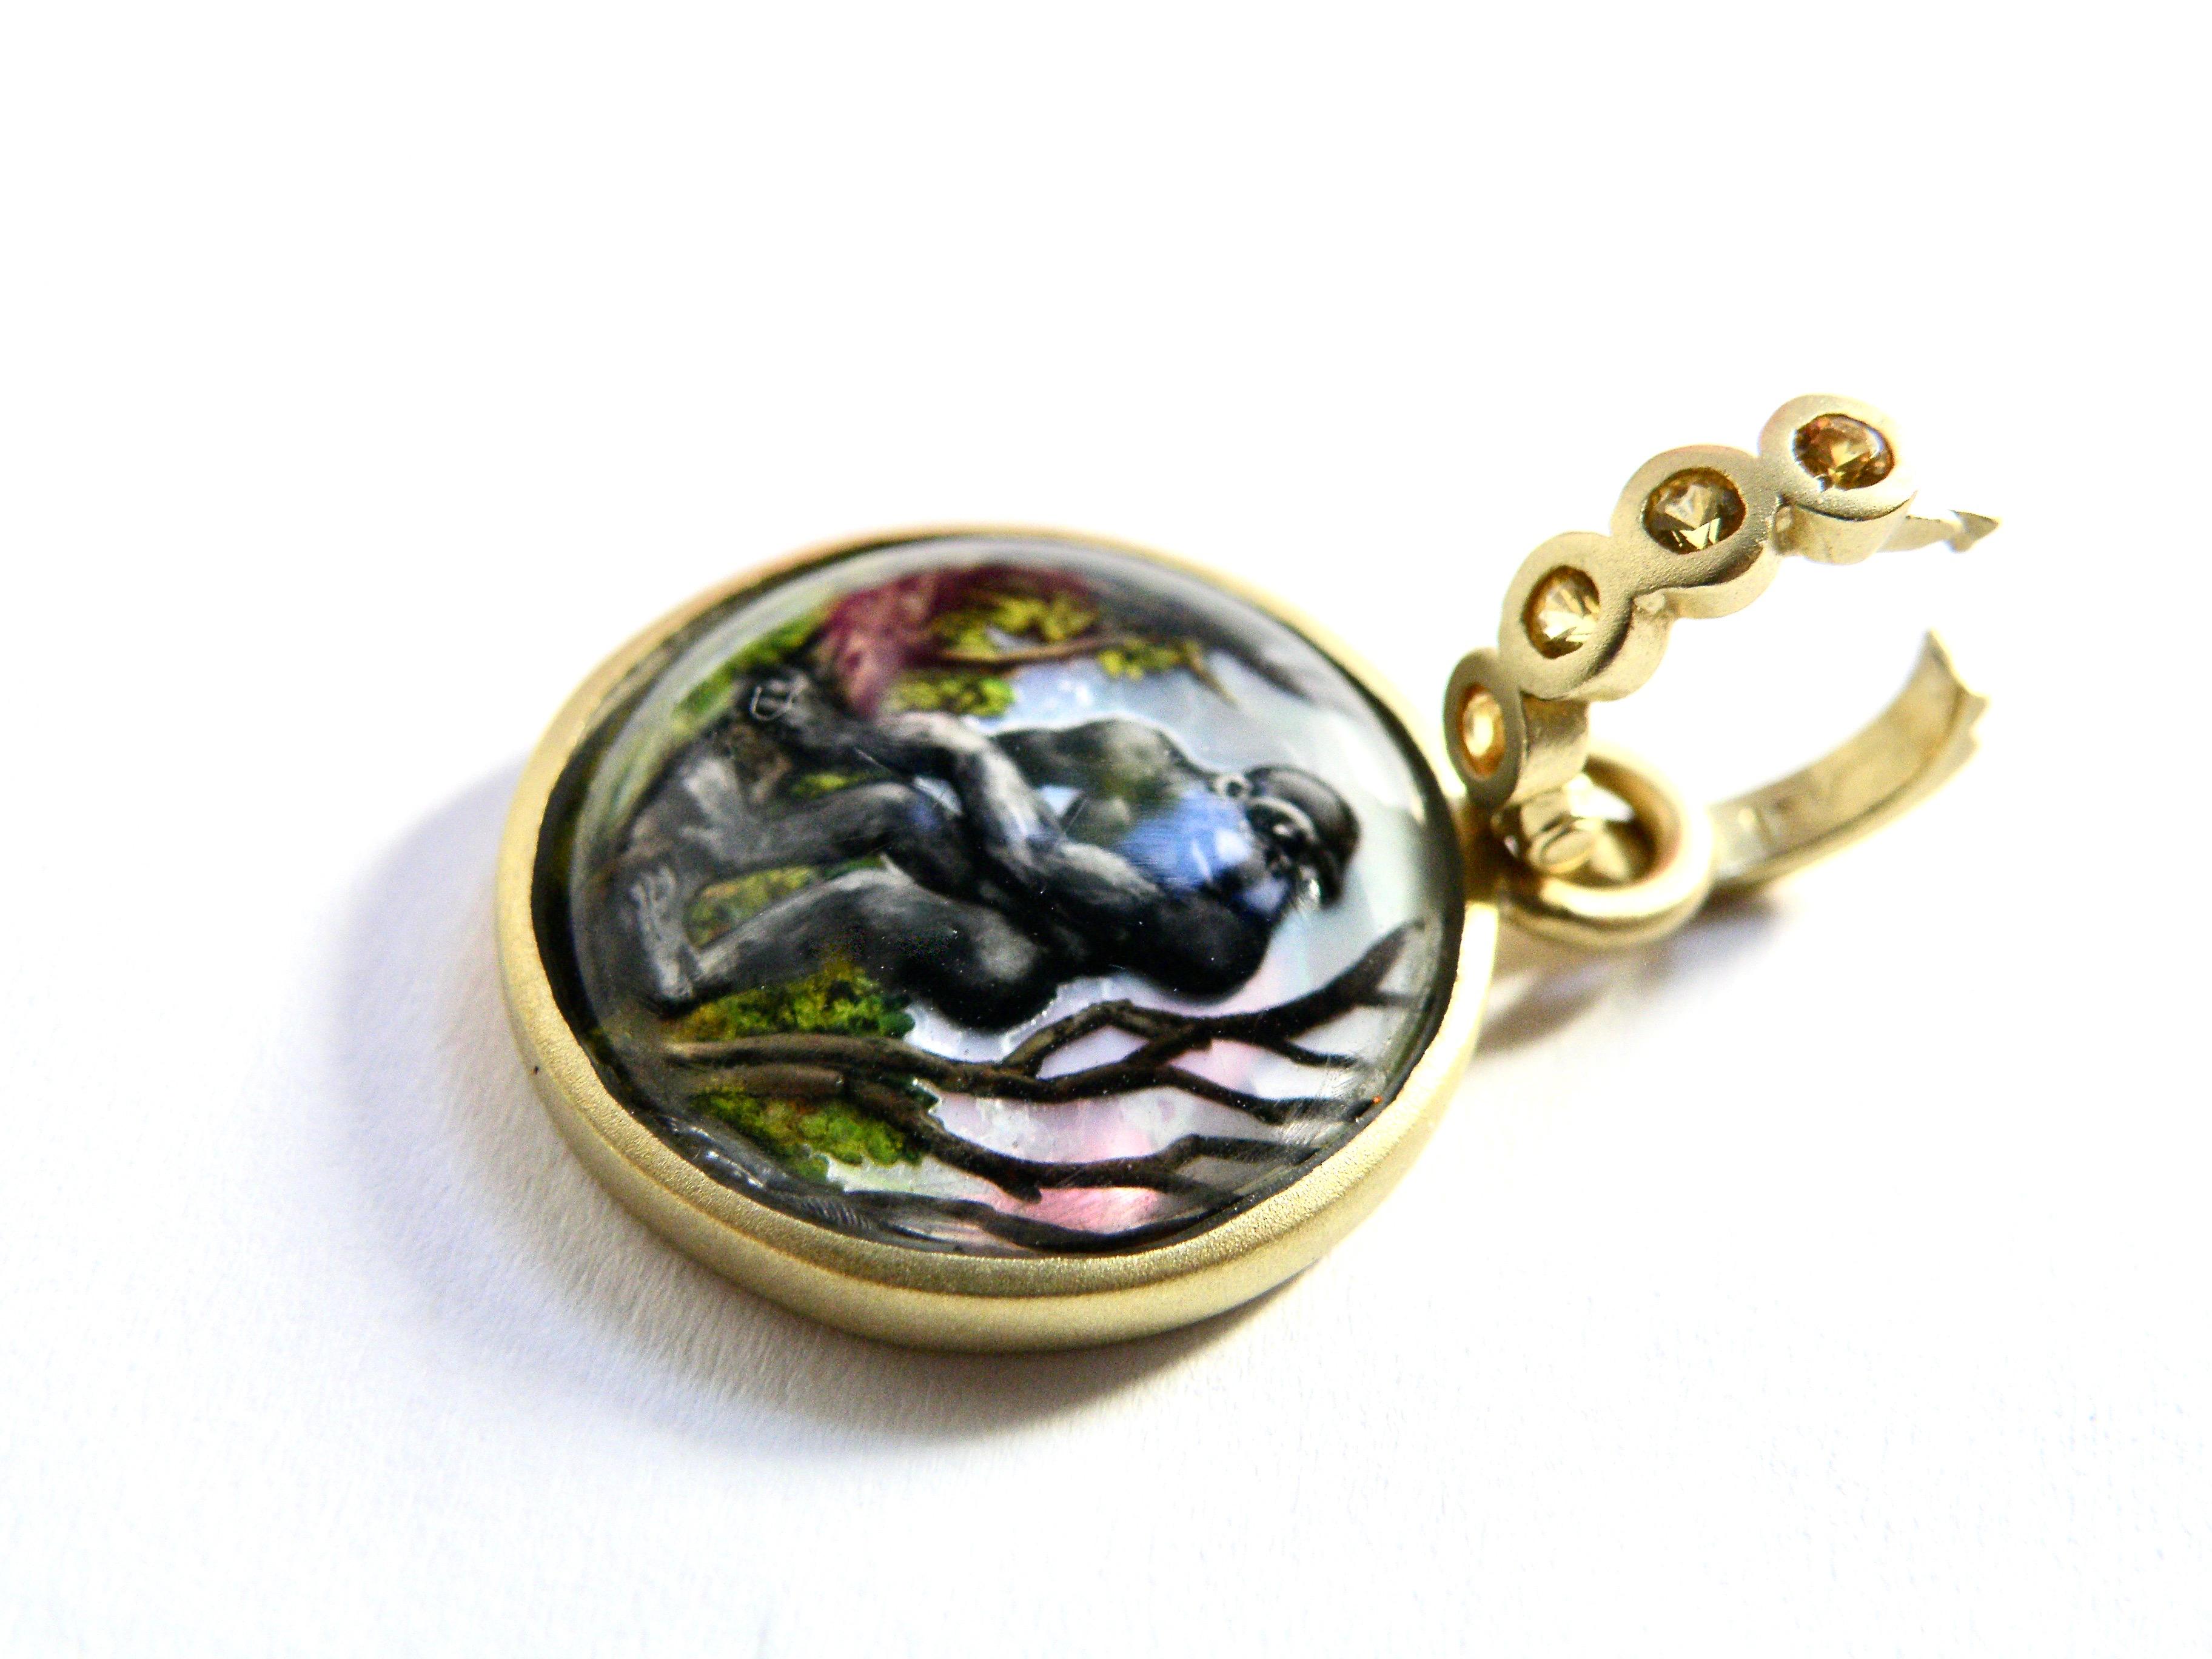 18k hand painted Gorilla reverse crystal gem carving in quarts crystal backed with mother -of -pearl carved by master carver from Idar Oberstein 26mm round with
 .30carat sapphire bail